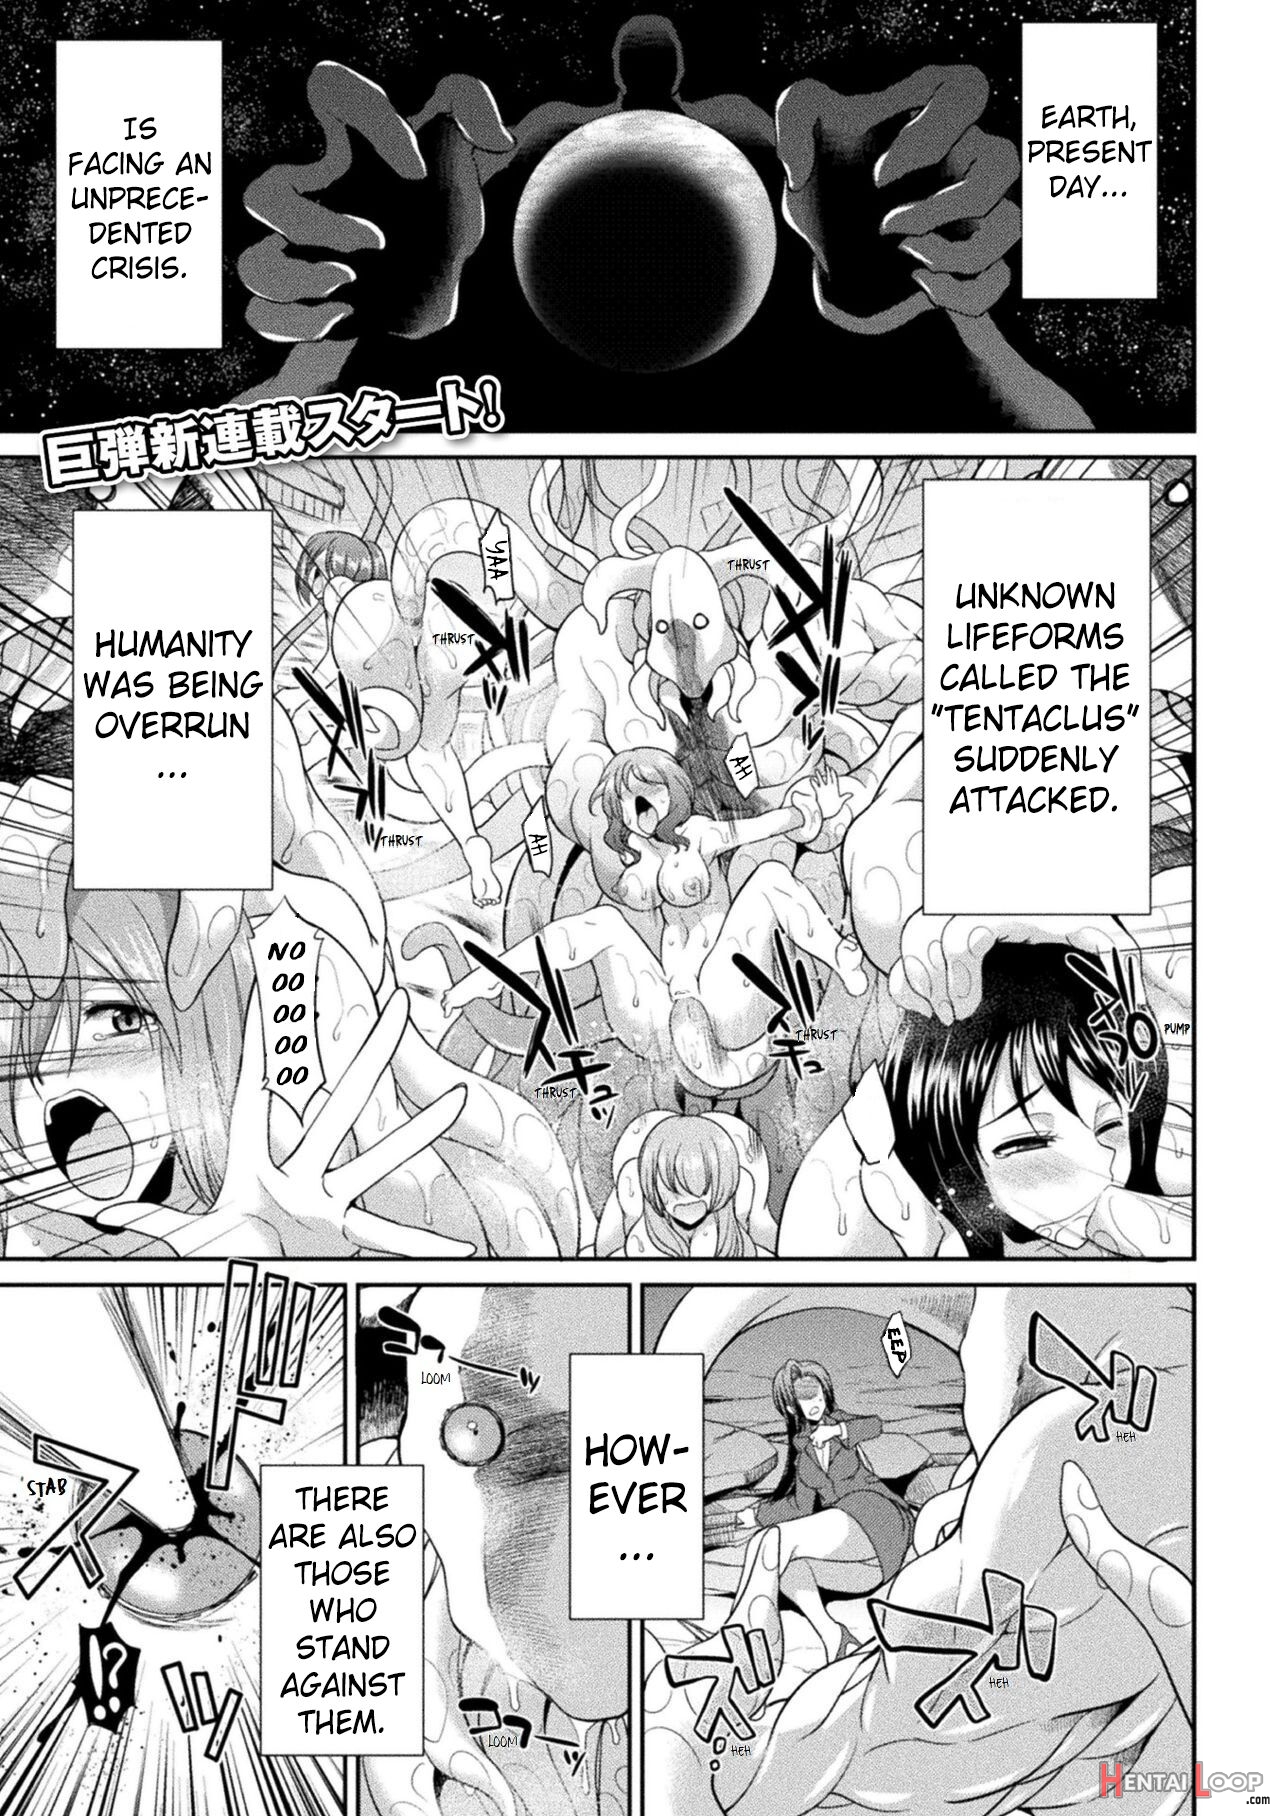 Special Duty Squadron Colorful Force Heroines Of Justice Vs The Tentacle Queen! The Great Battle Of Futa Training!? page 5